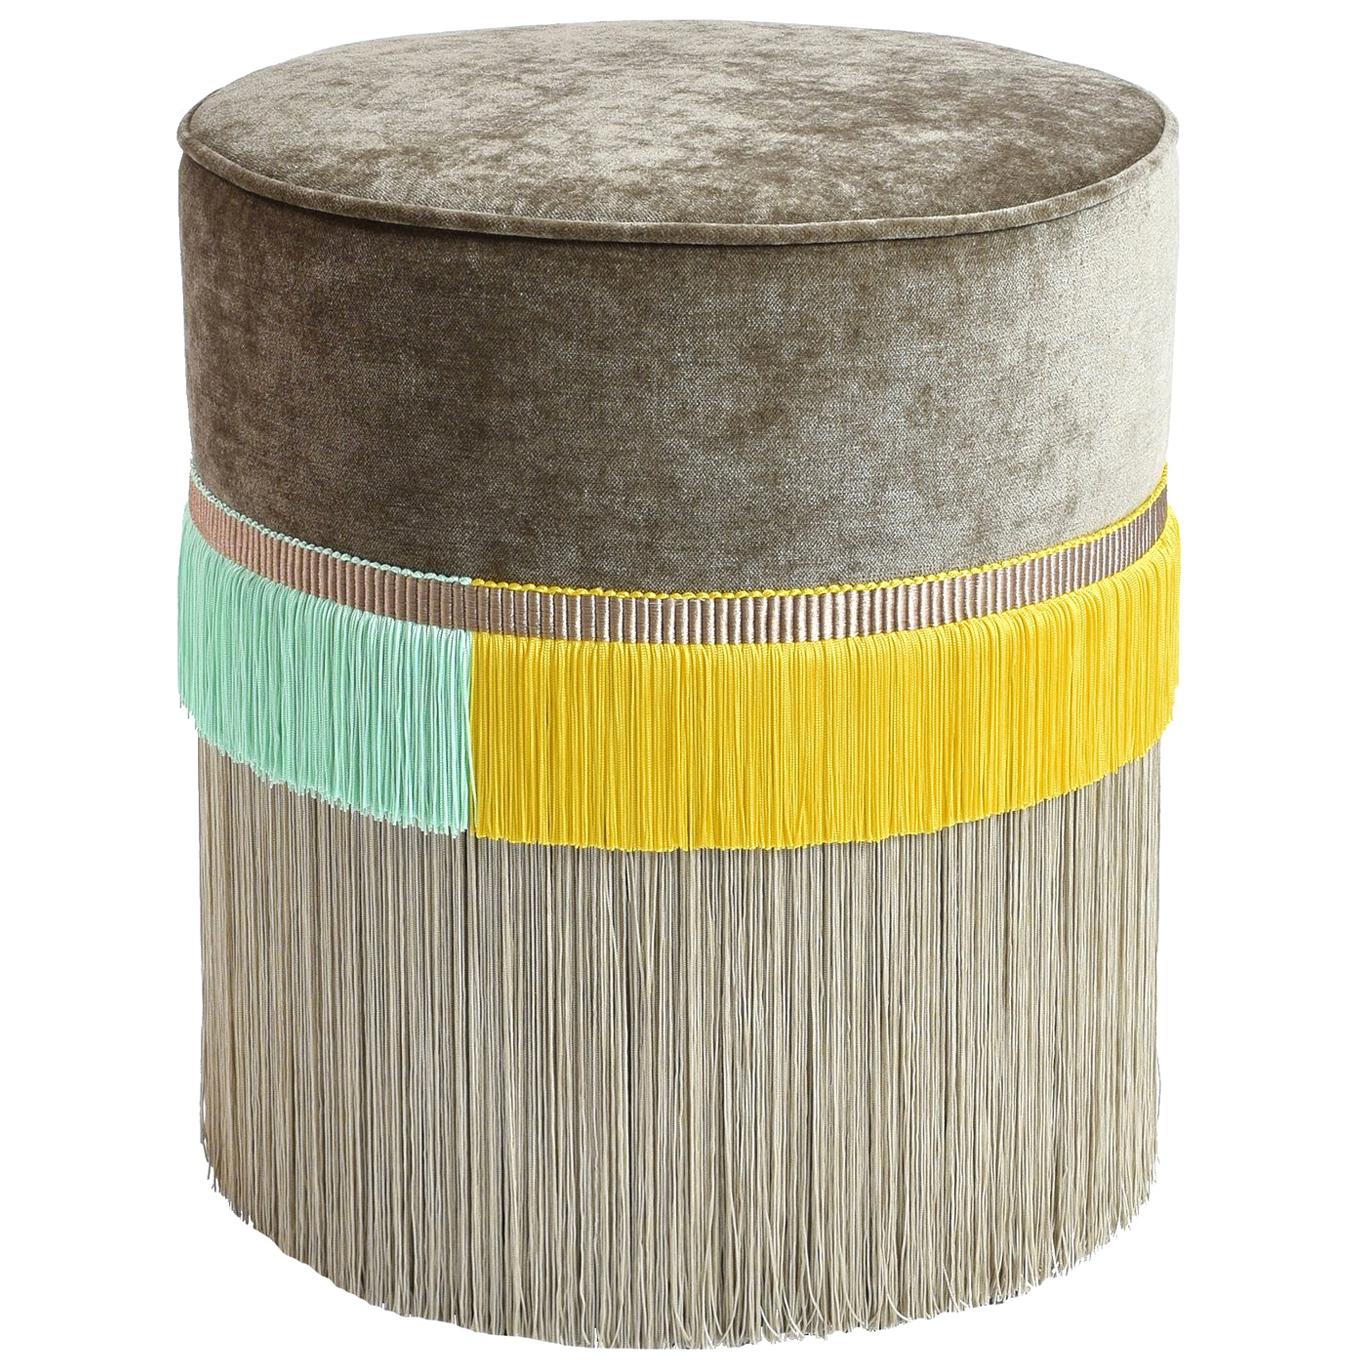 Couture Beige Pouf with Line Fringe by Lorenza Bozzoli Design